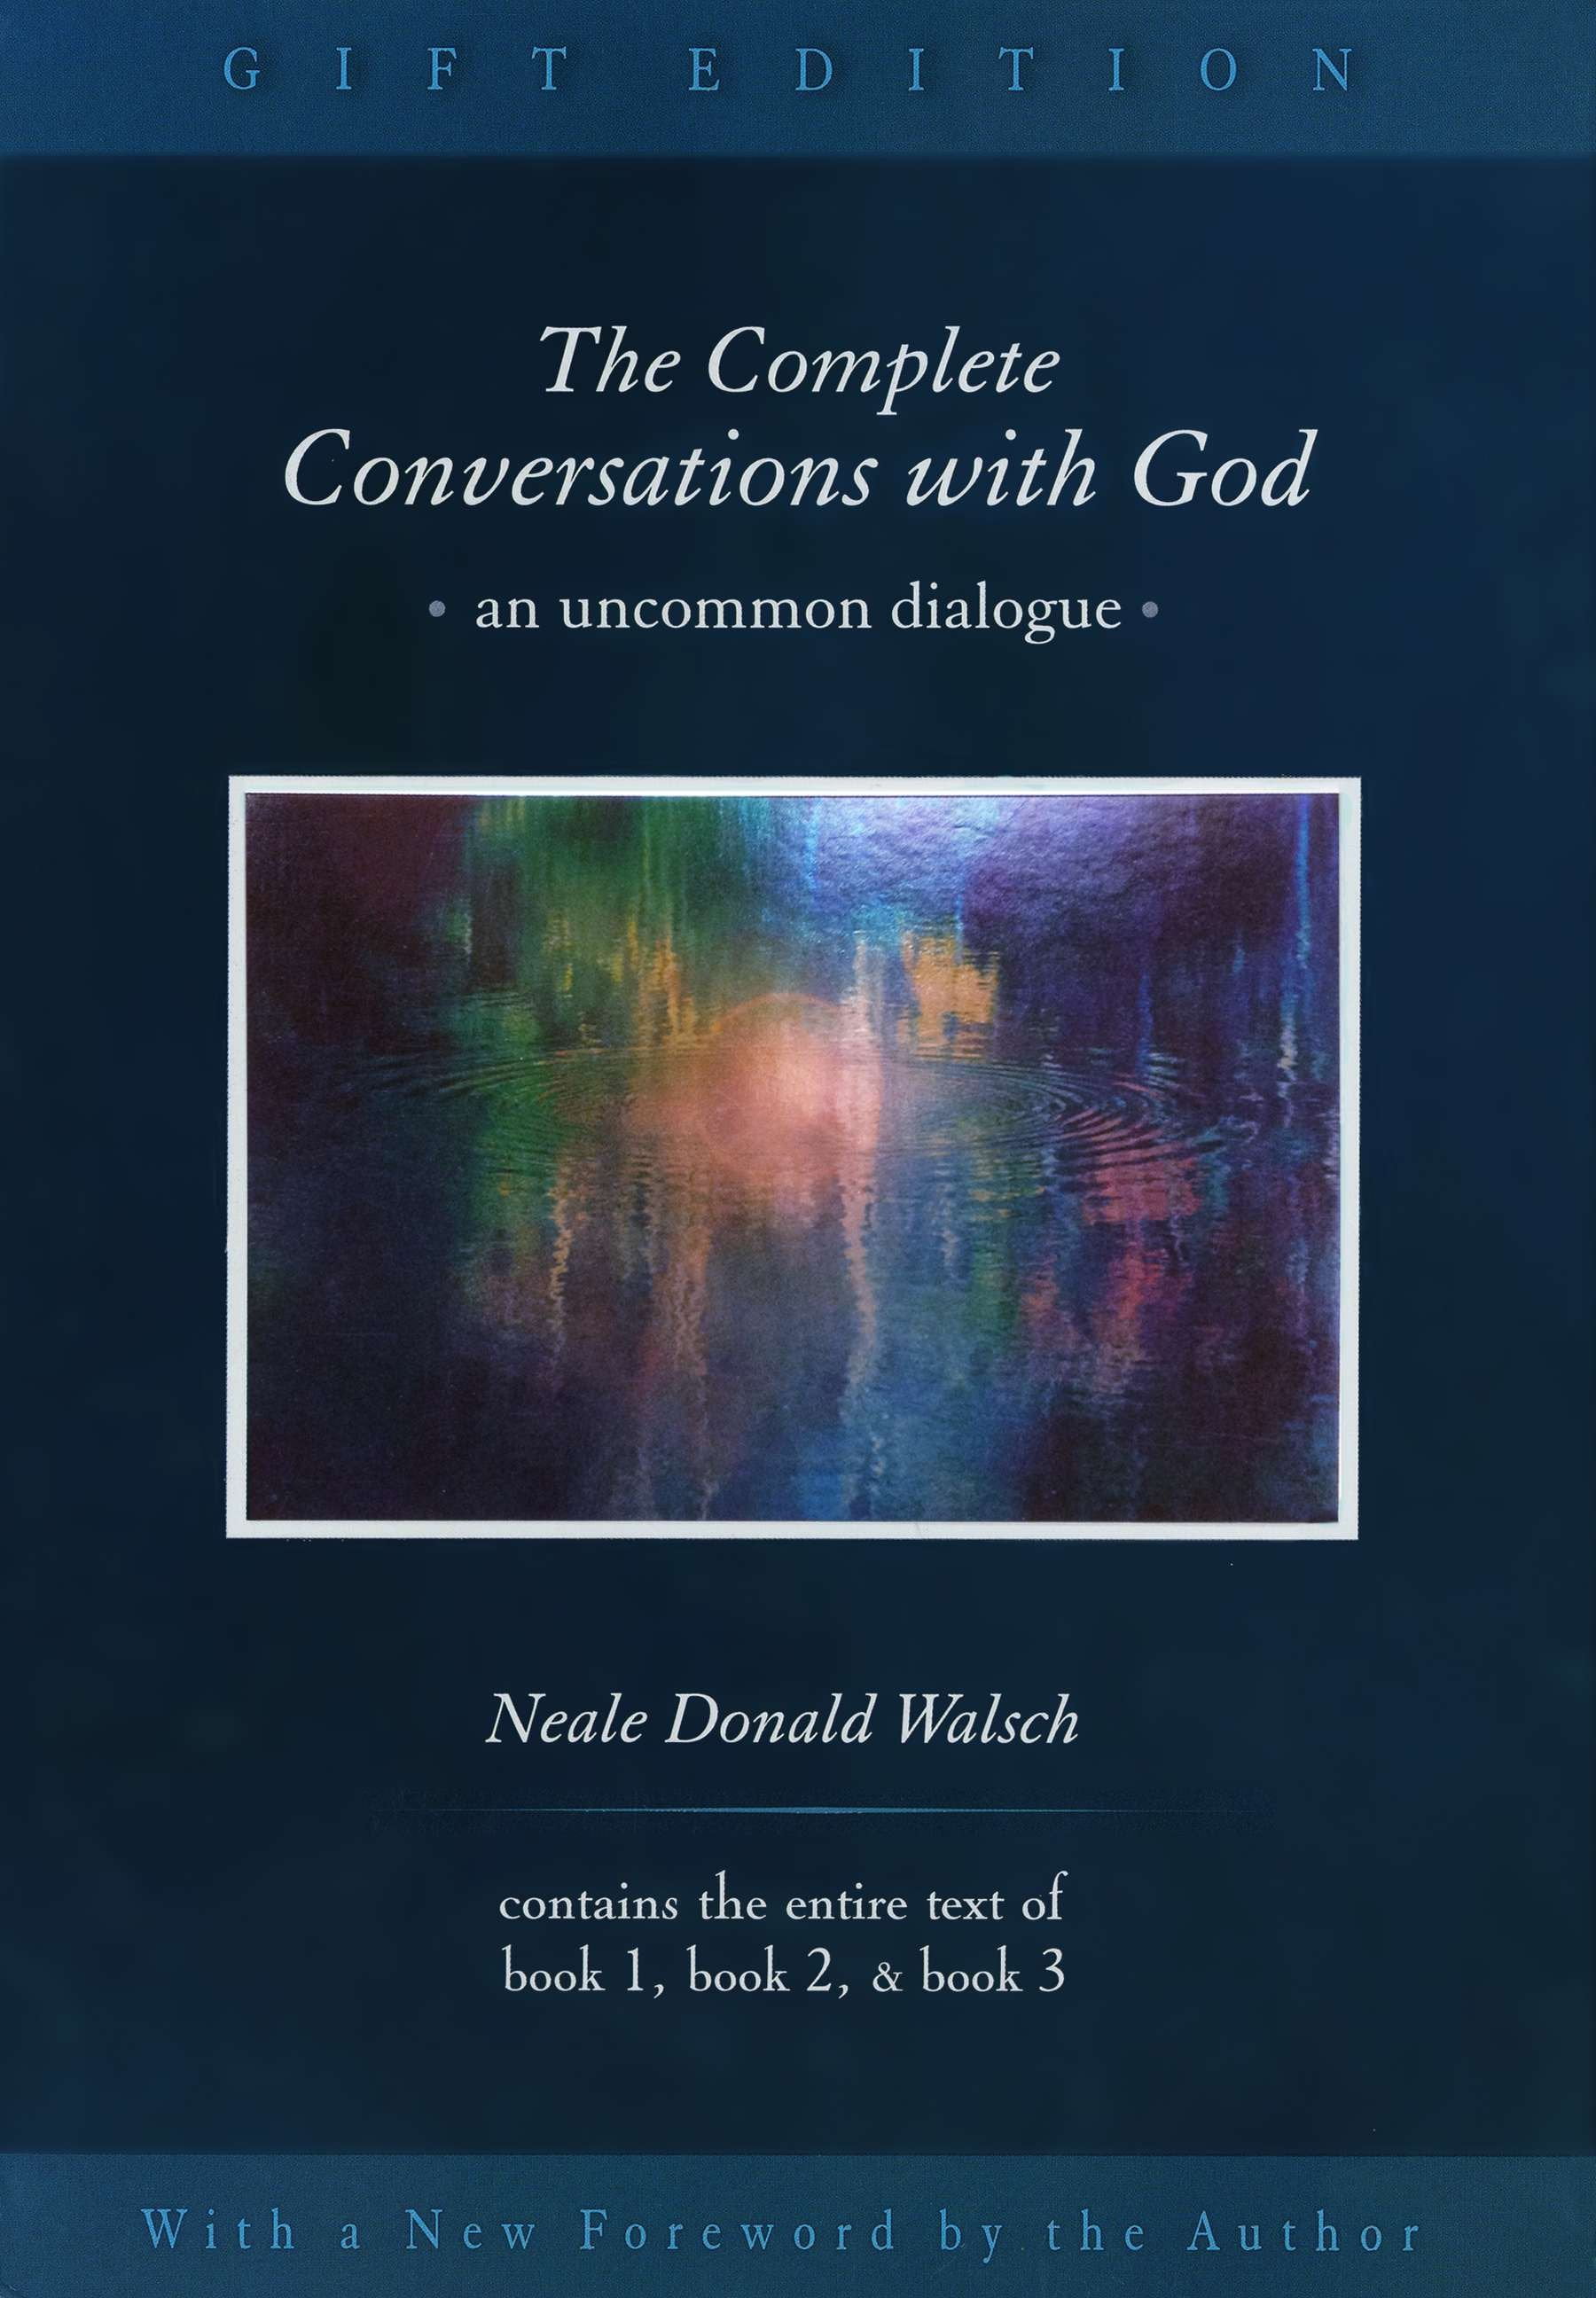 conversation with god book review